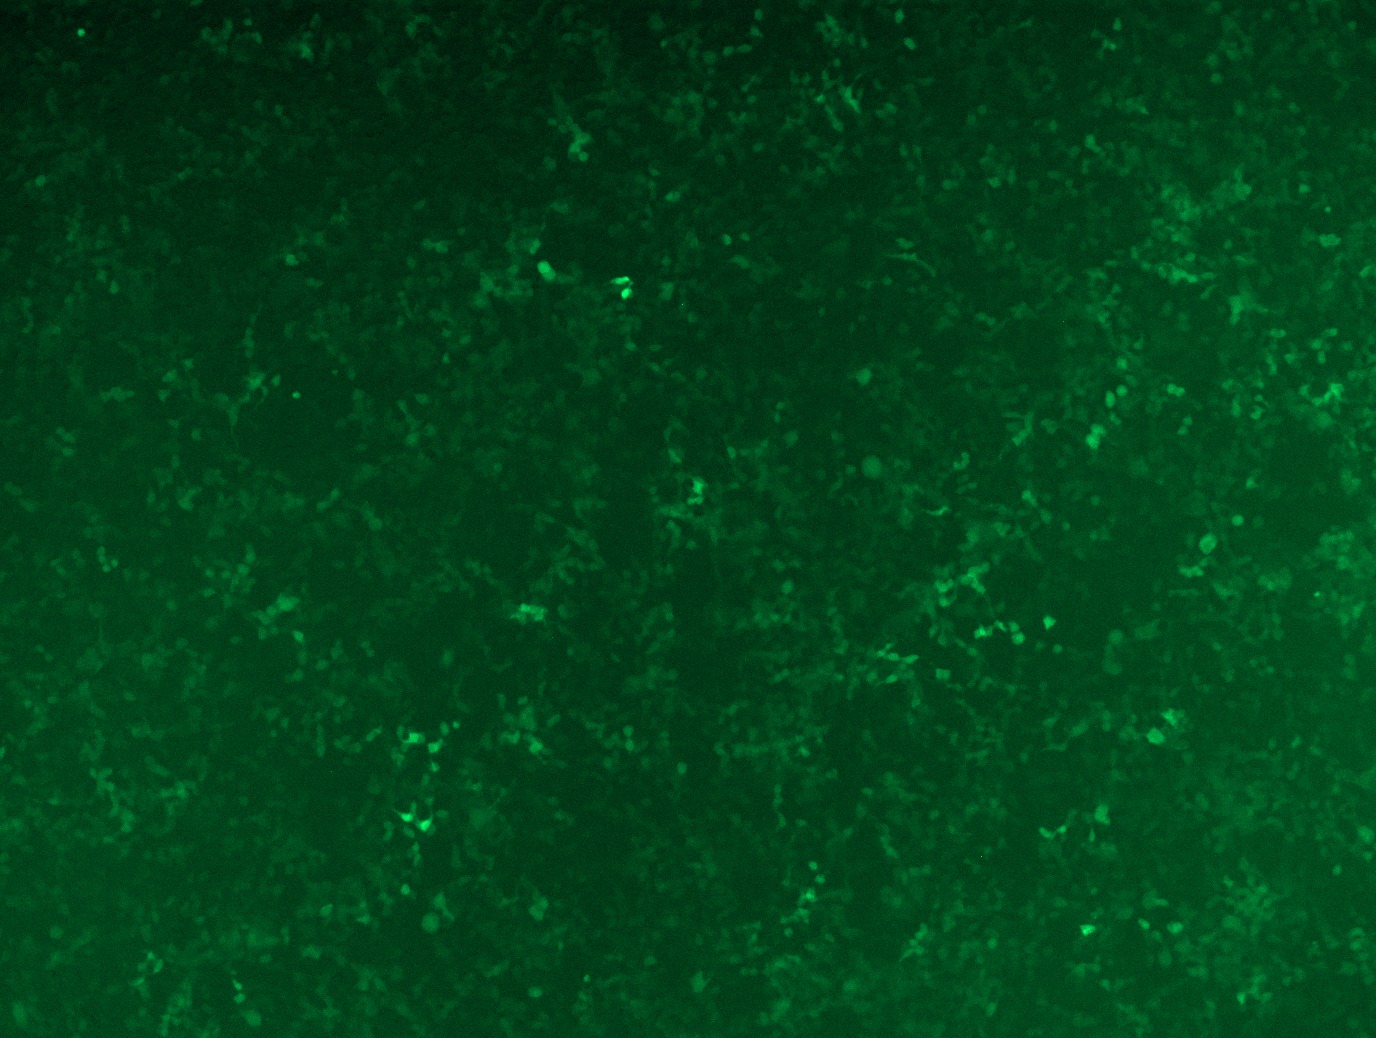 GFP signal was observed under microscope at 48 hours after transduction of TL308295A virus into HEK293 cells. TL308295A virus was prepared using lenti-shRNA TL308295A and TR30037 packaging kit.